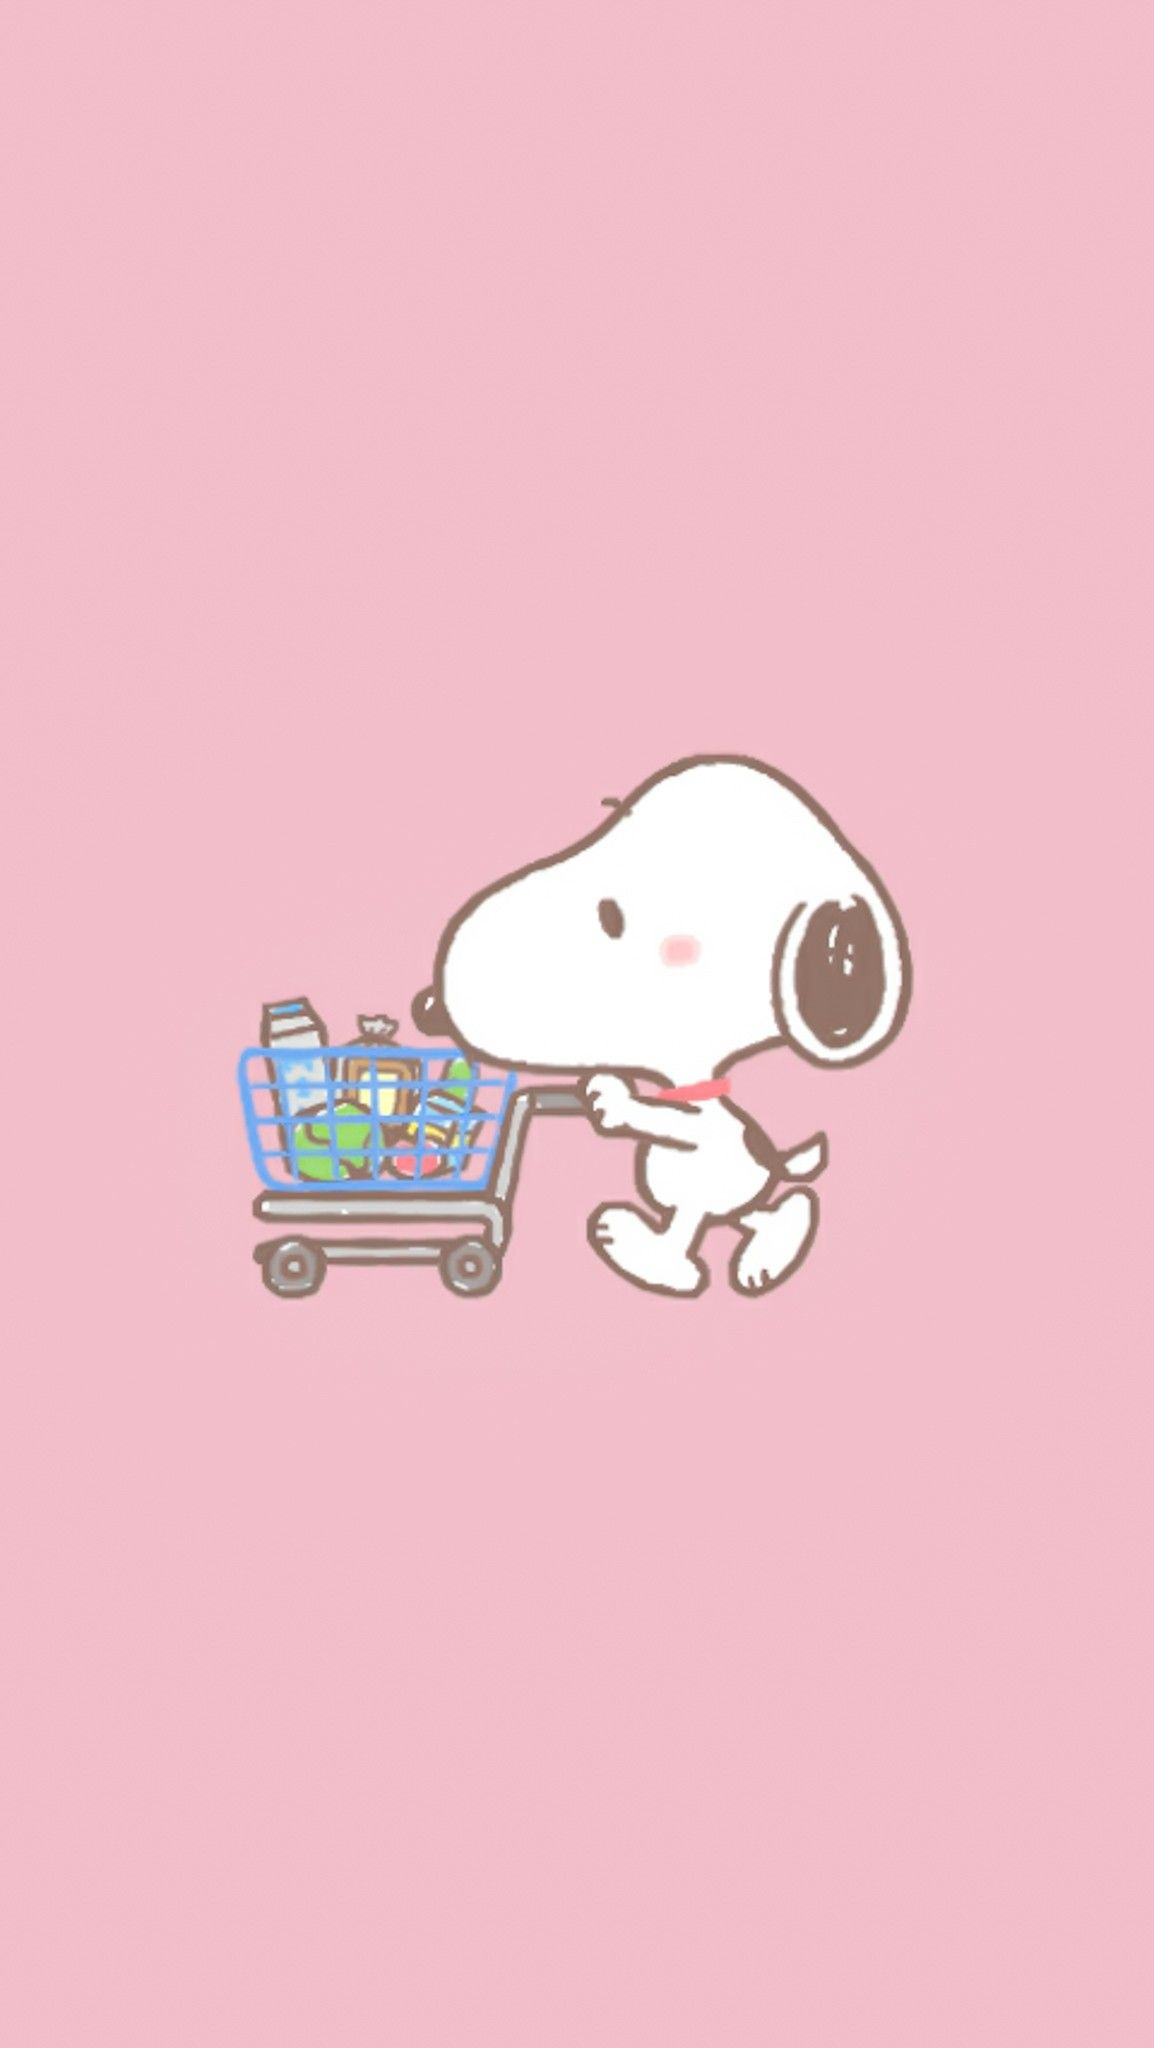 1154x2048 Pin by Aekkalisa on Snoopy | Snoopy wallpaper, Snoopy pictures, Snoopy love